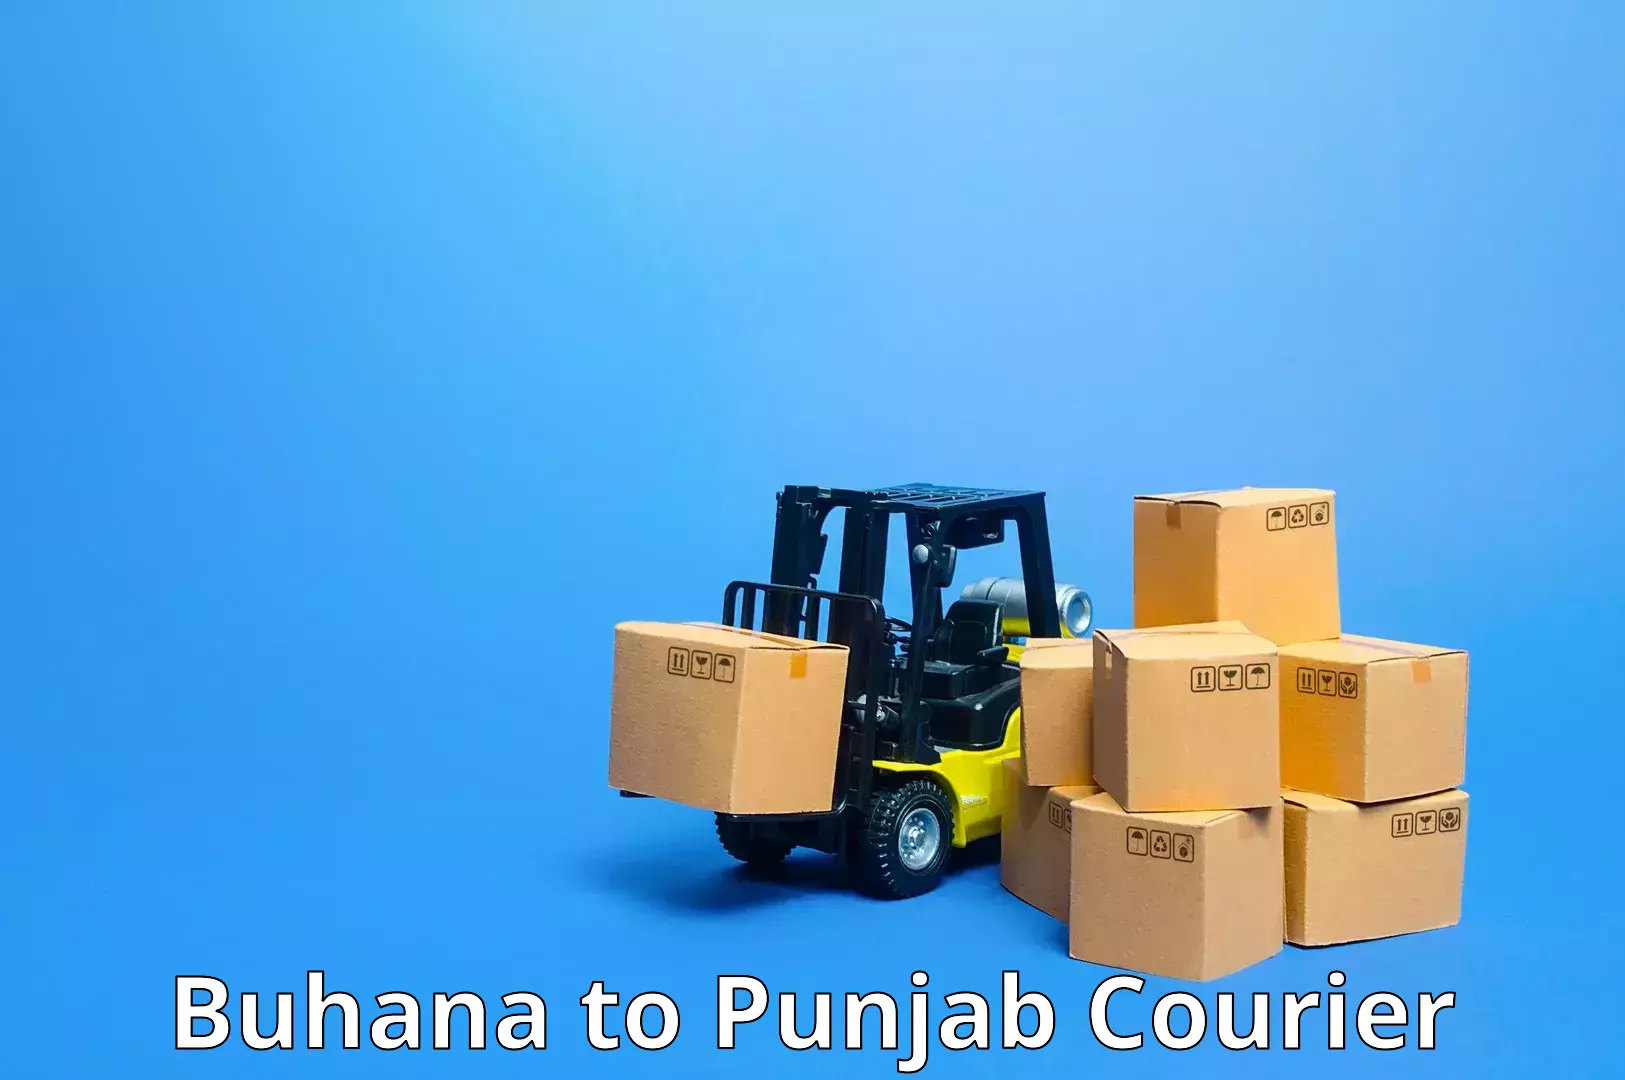 Courier service innovation Buhana to Firozpur